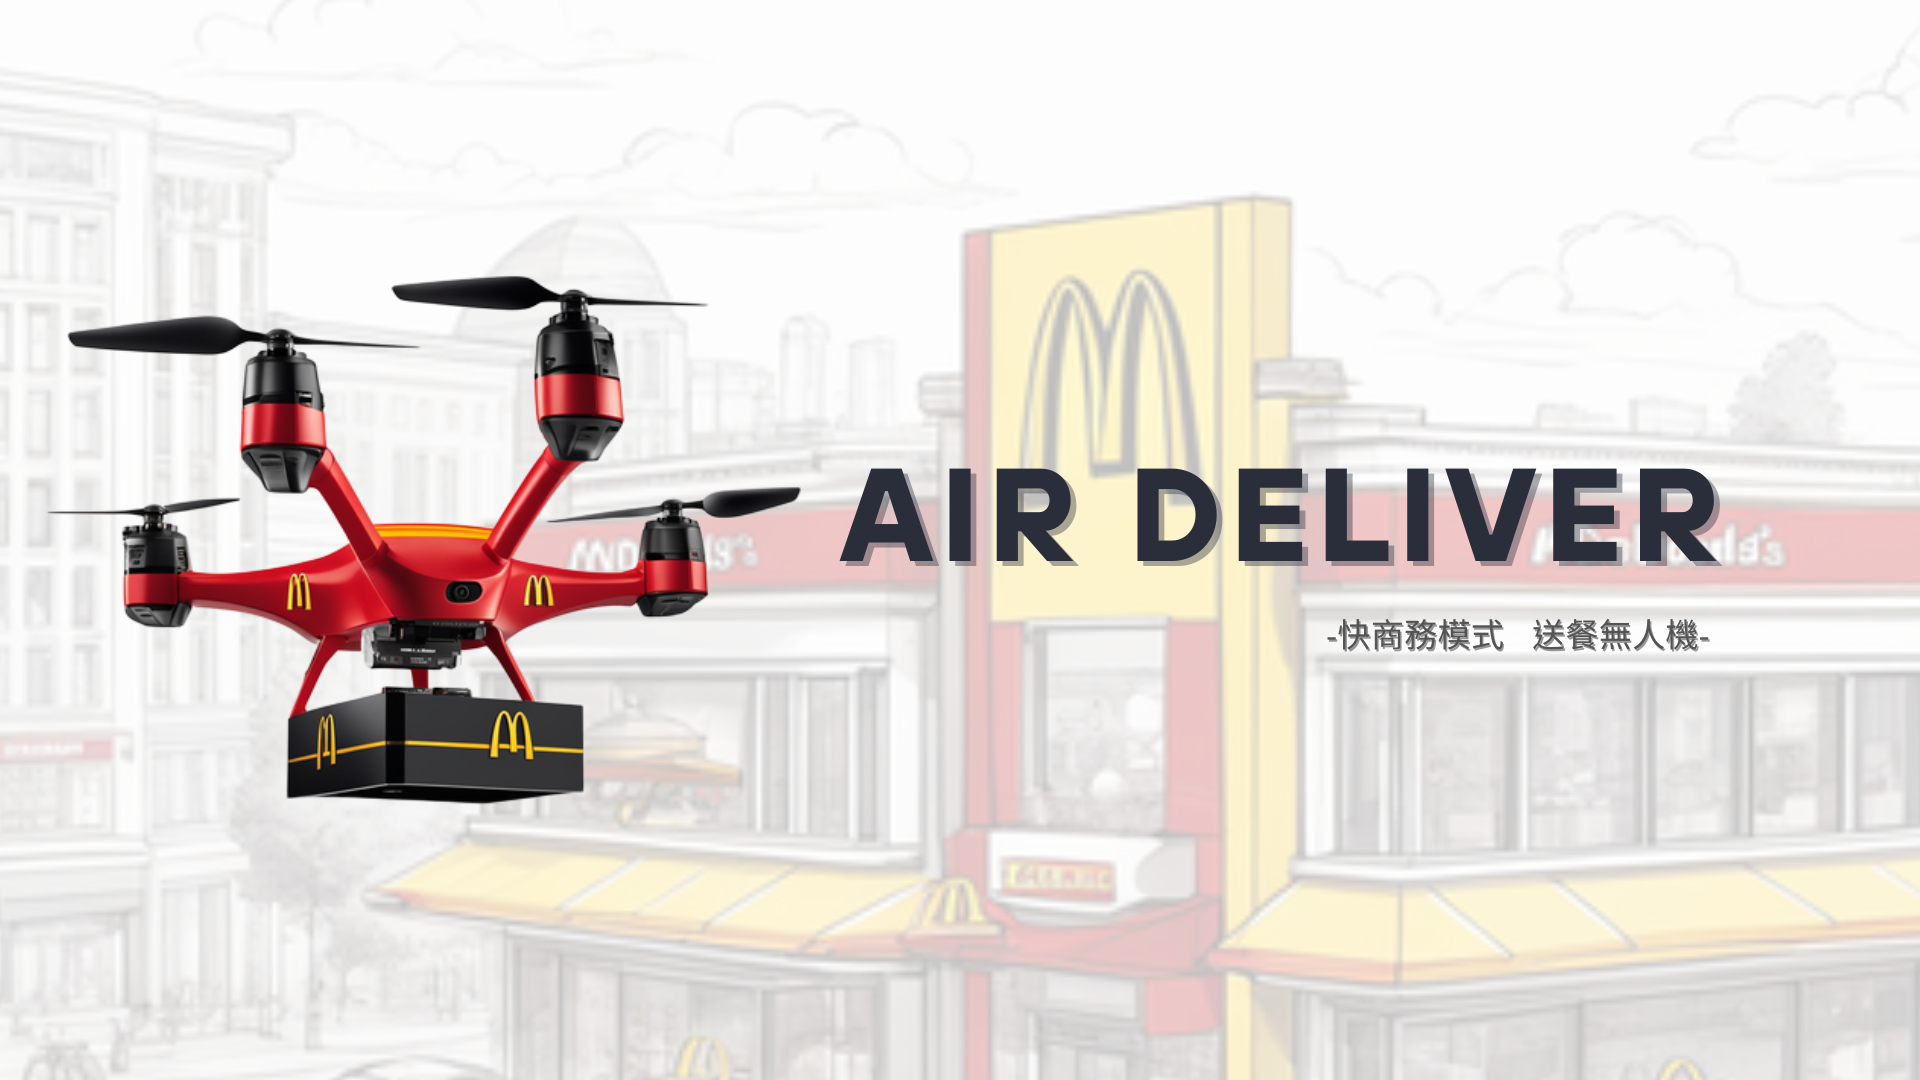 AIR DELIVER 送餐無人機